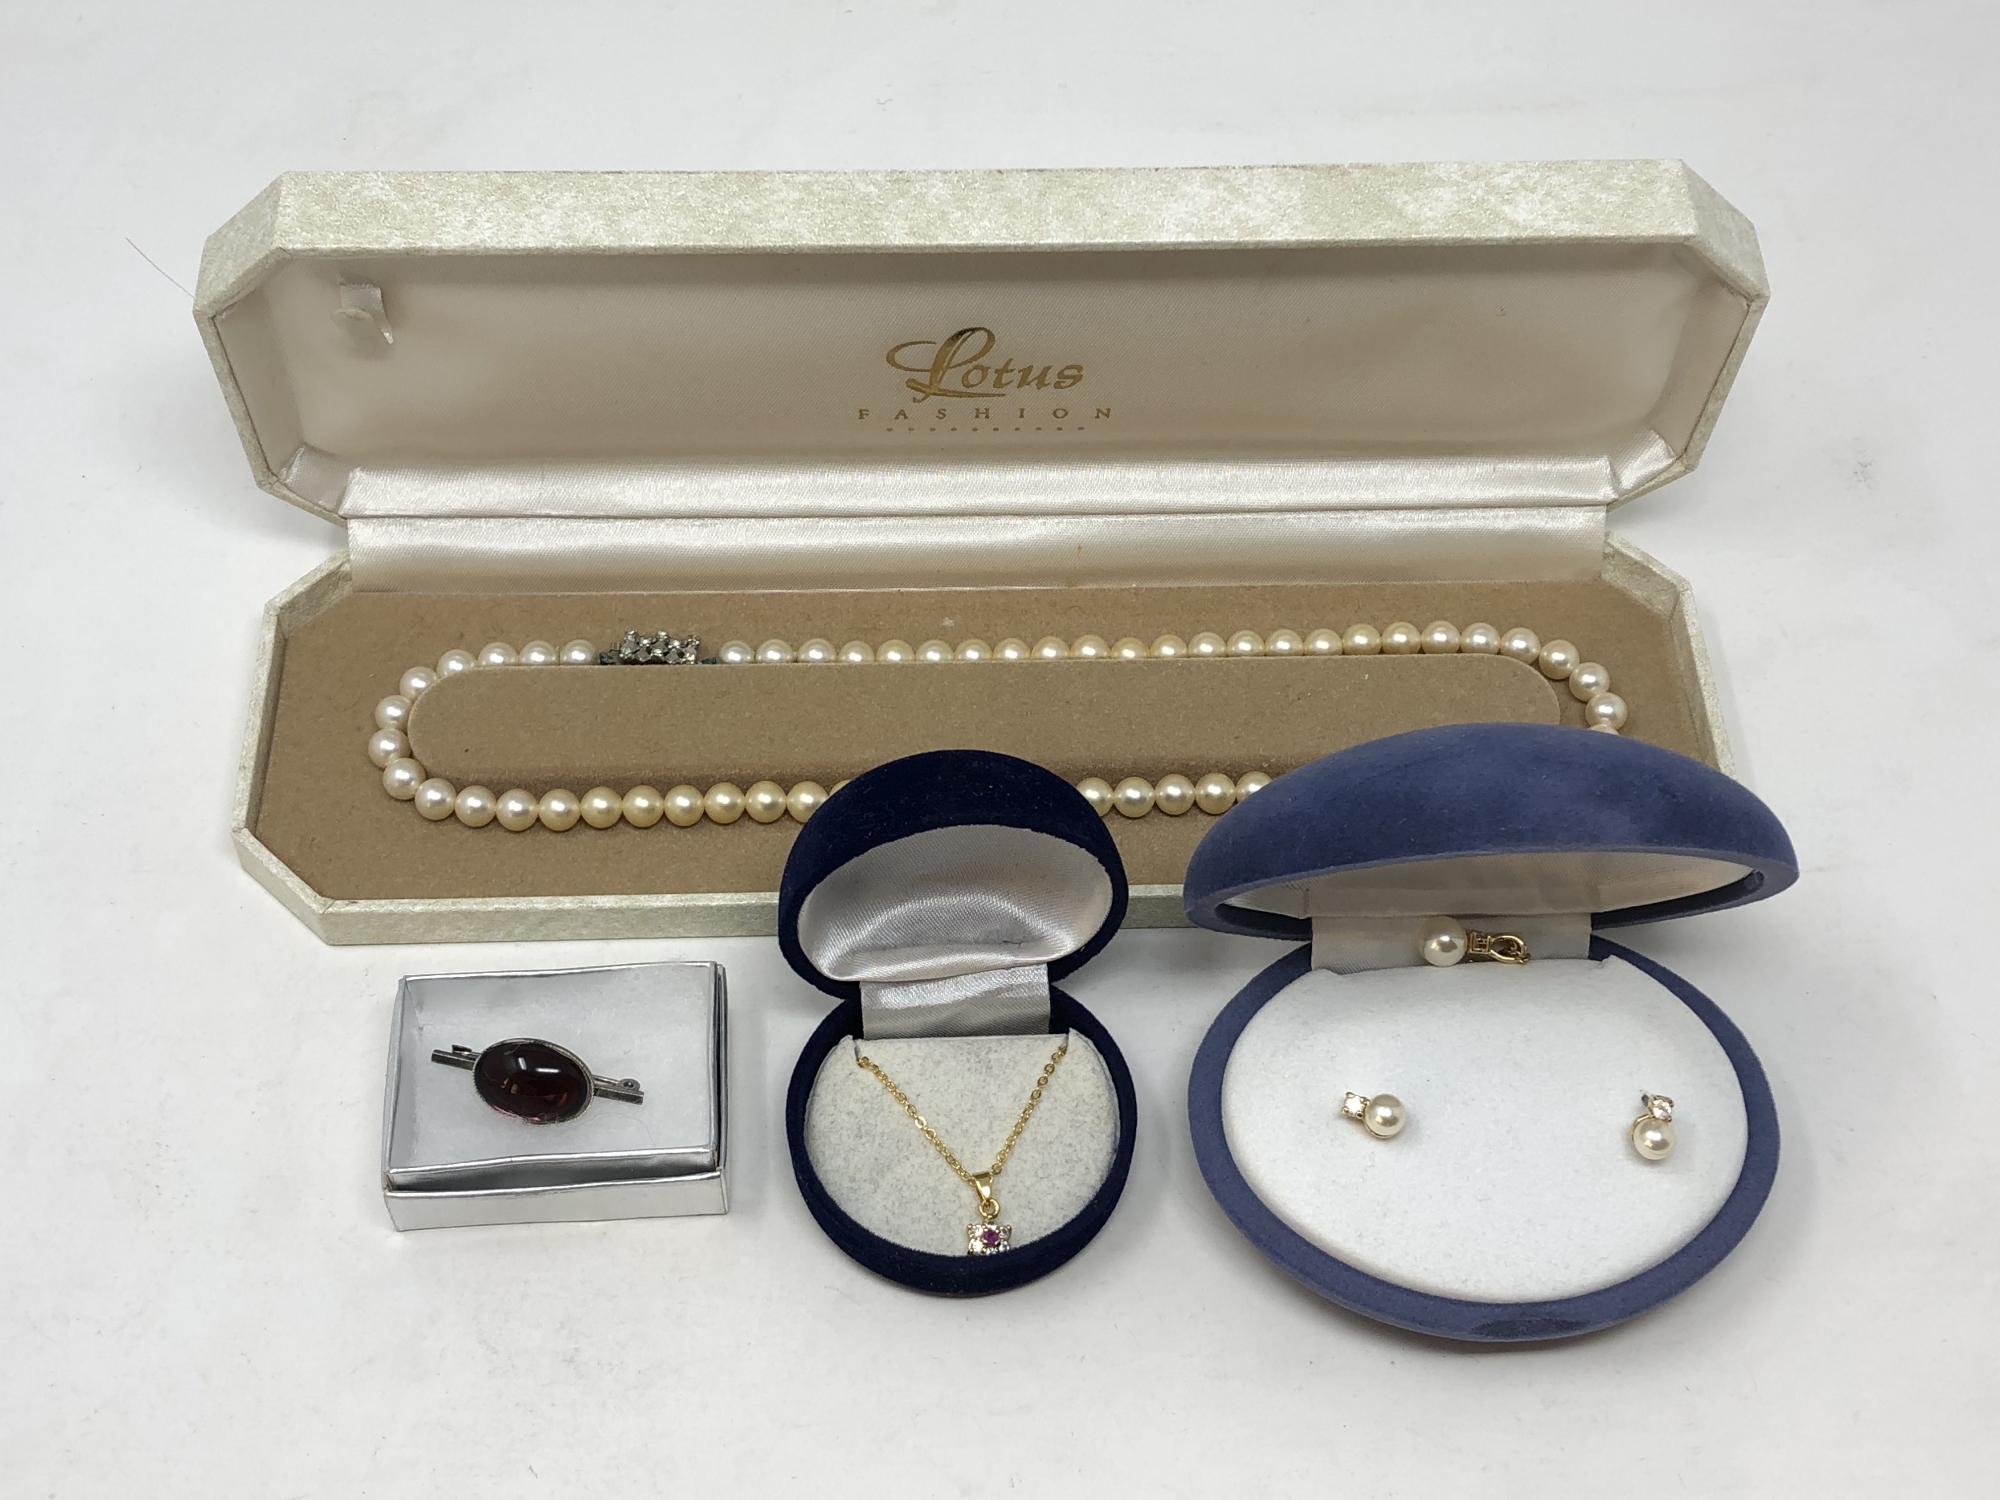 A boxed pearl necklace, simulated pearl pendant and earrings,